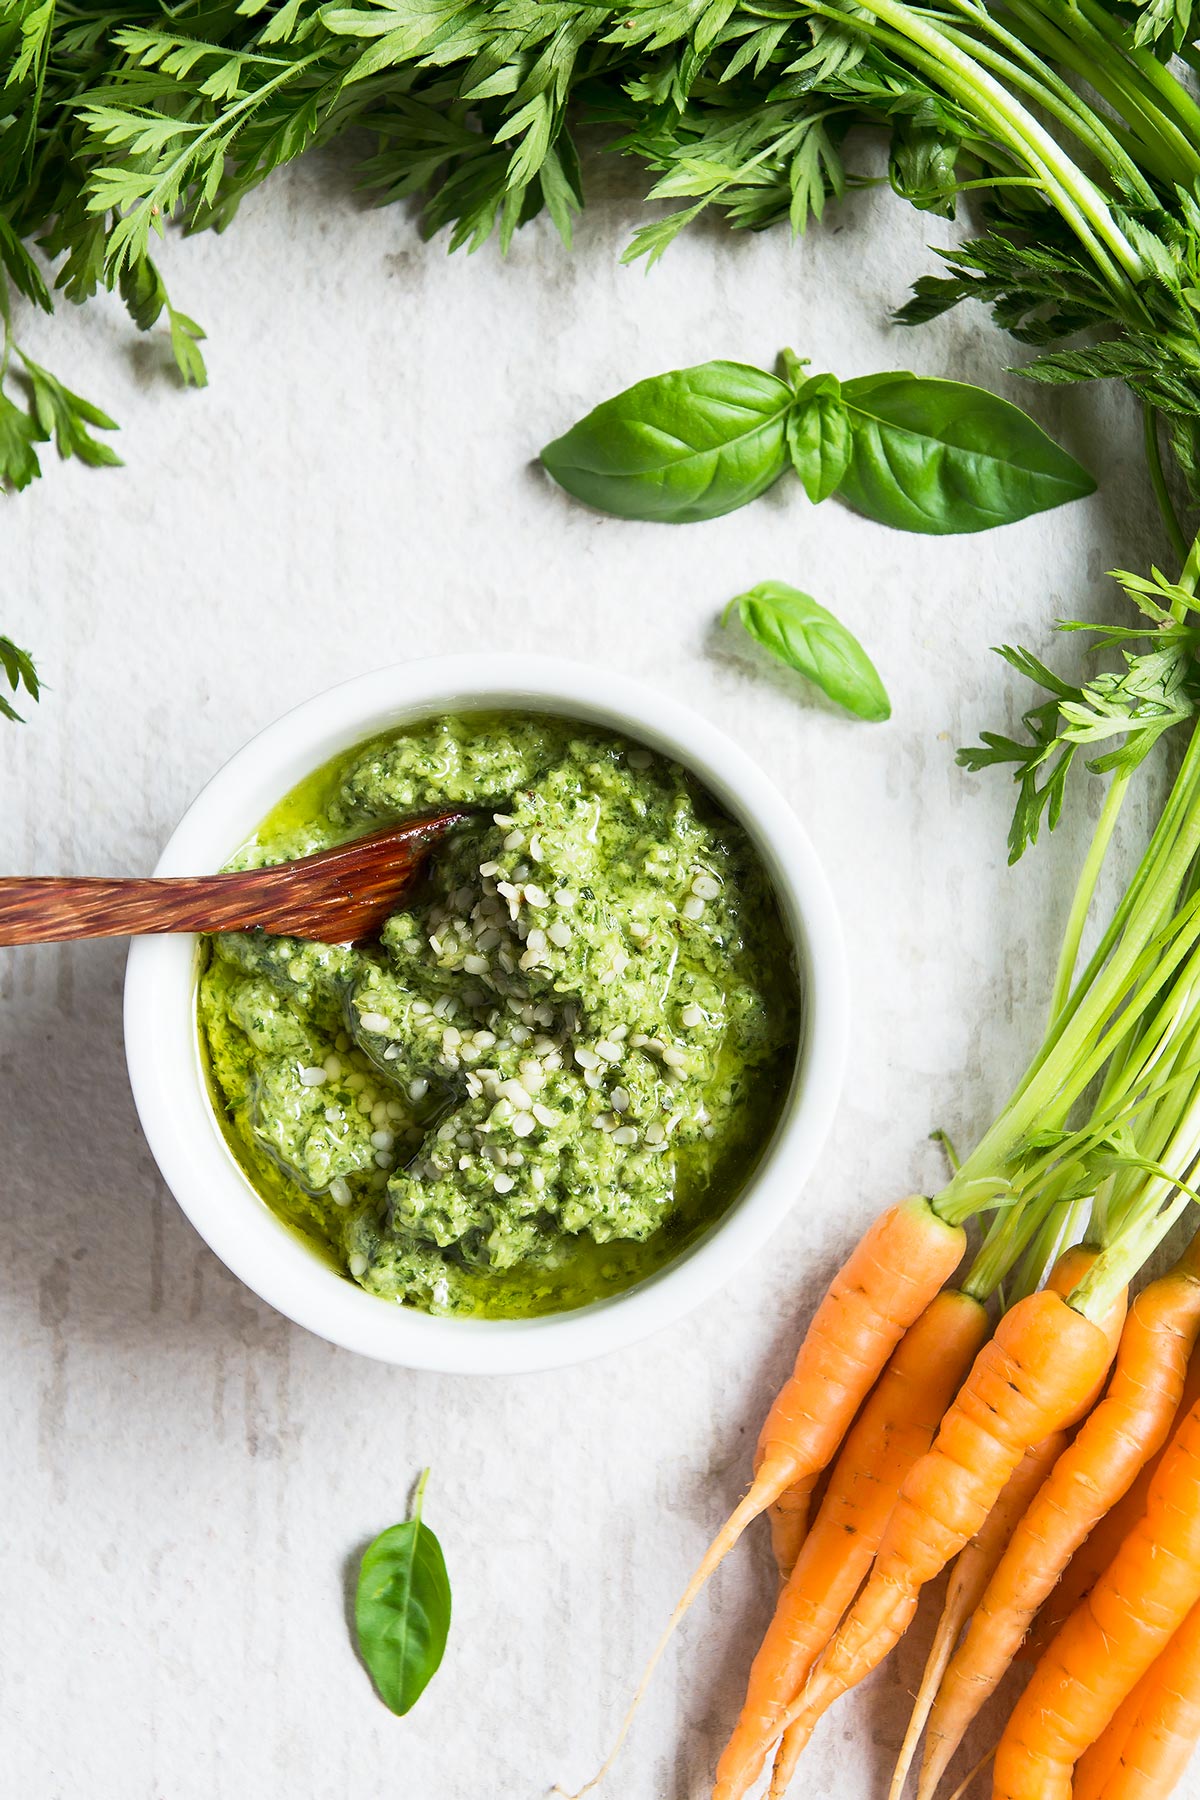 Carrot Top Pesto with Seeds